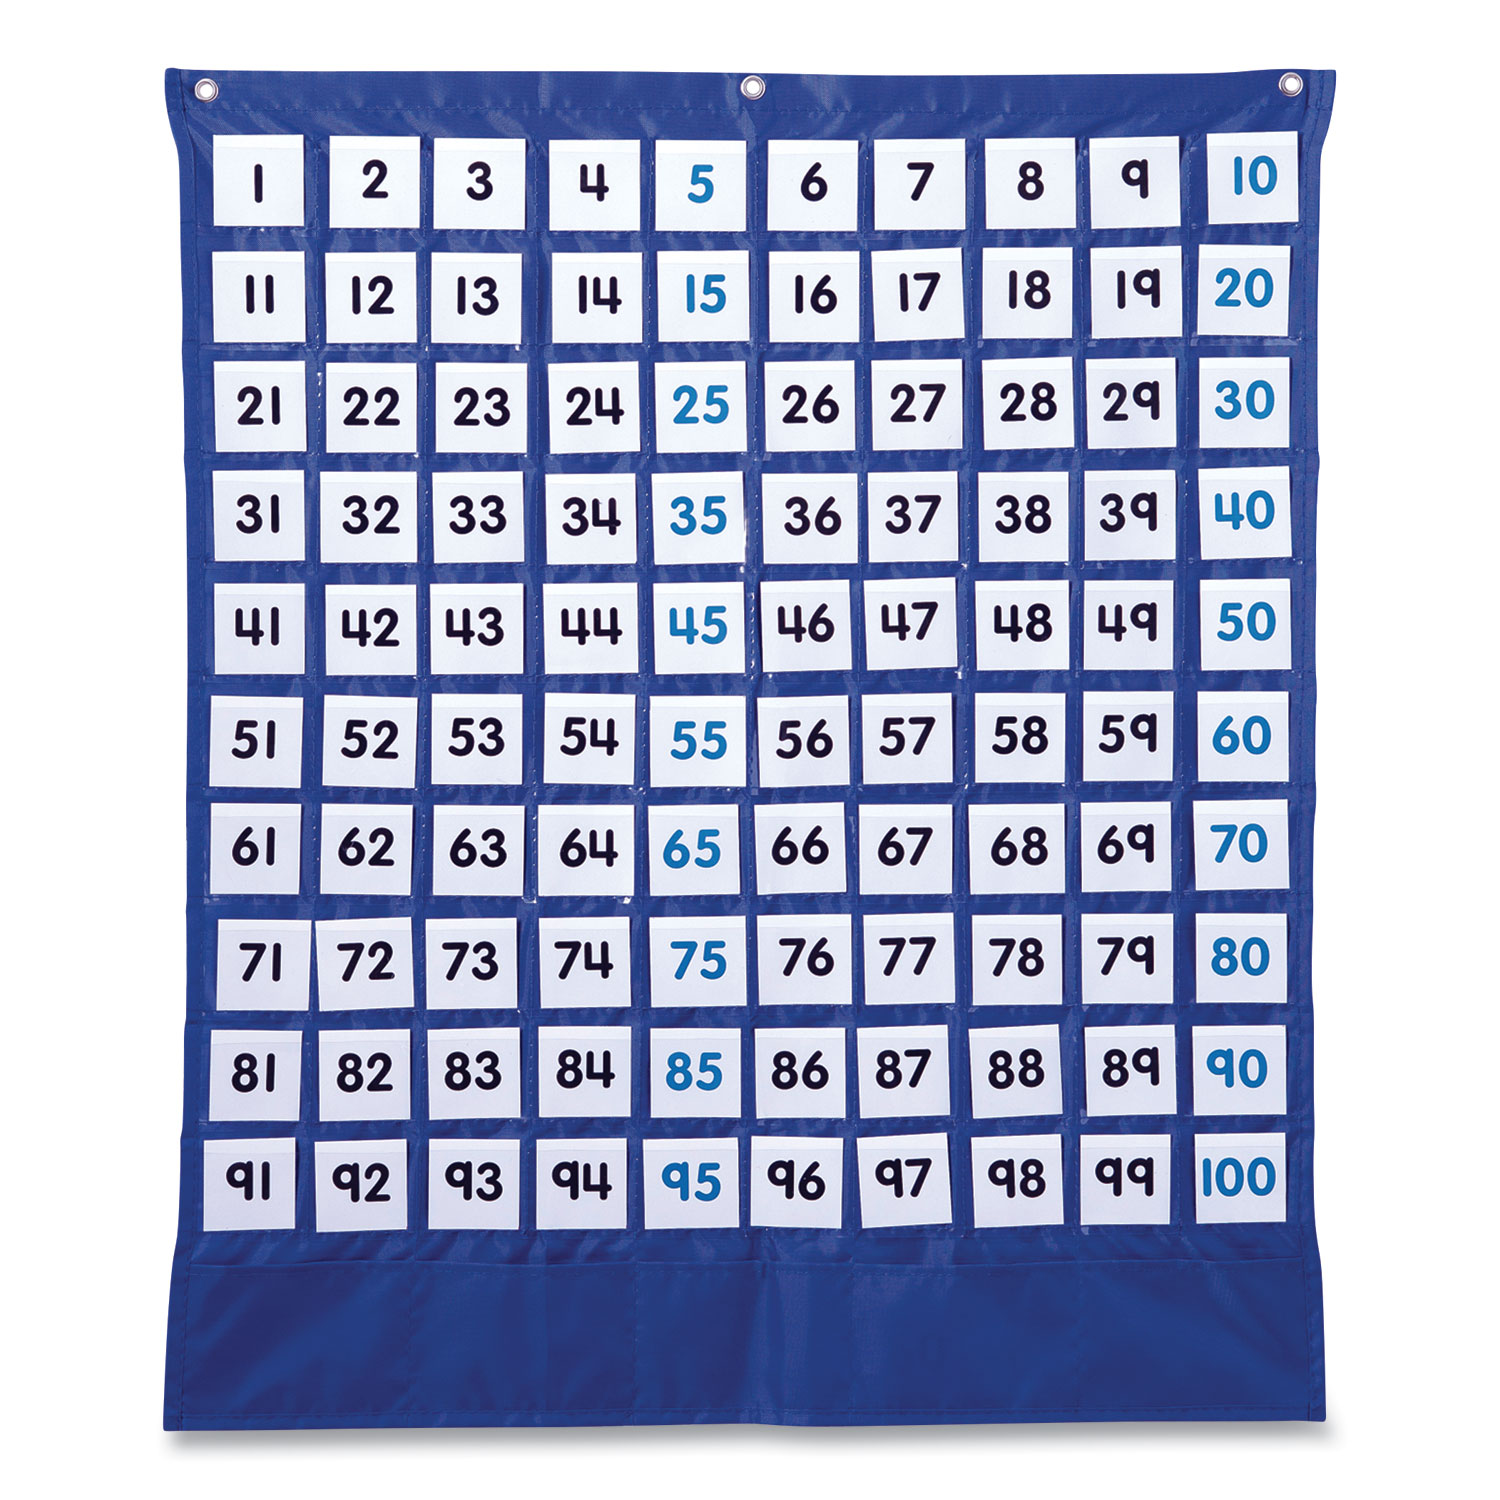  Carson-Dellosa Publishing 5604 Hundreds Pocket Chart with 100 Clear Pockets, Colored Number Cards, 26 x 30 (CDP158157) 